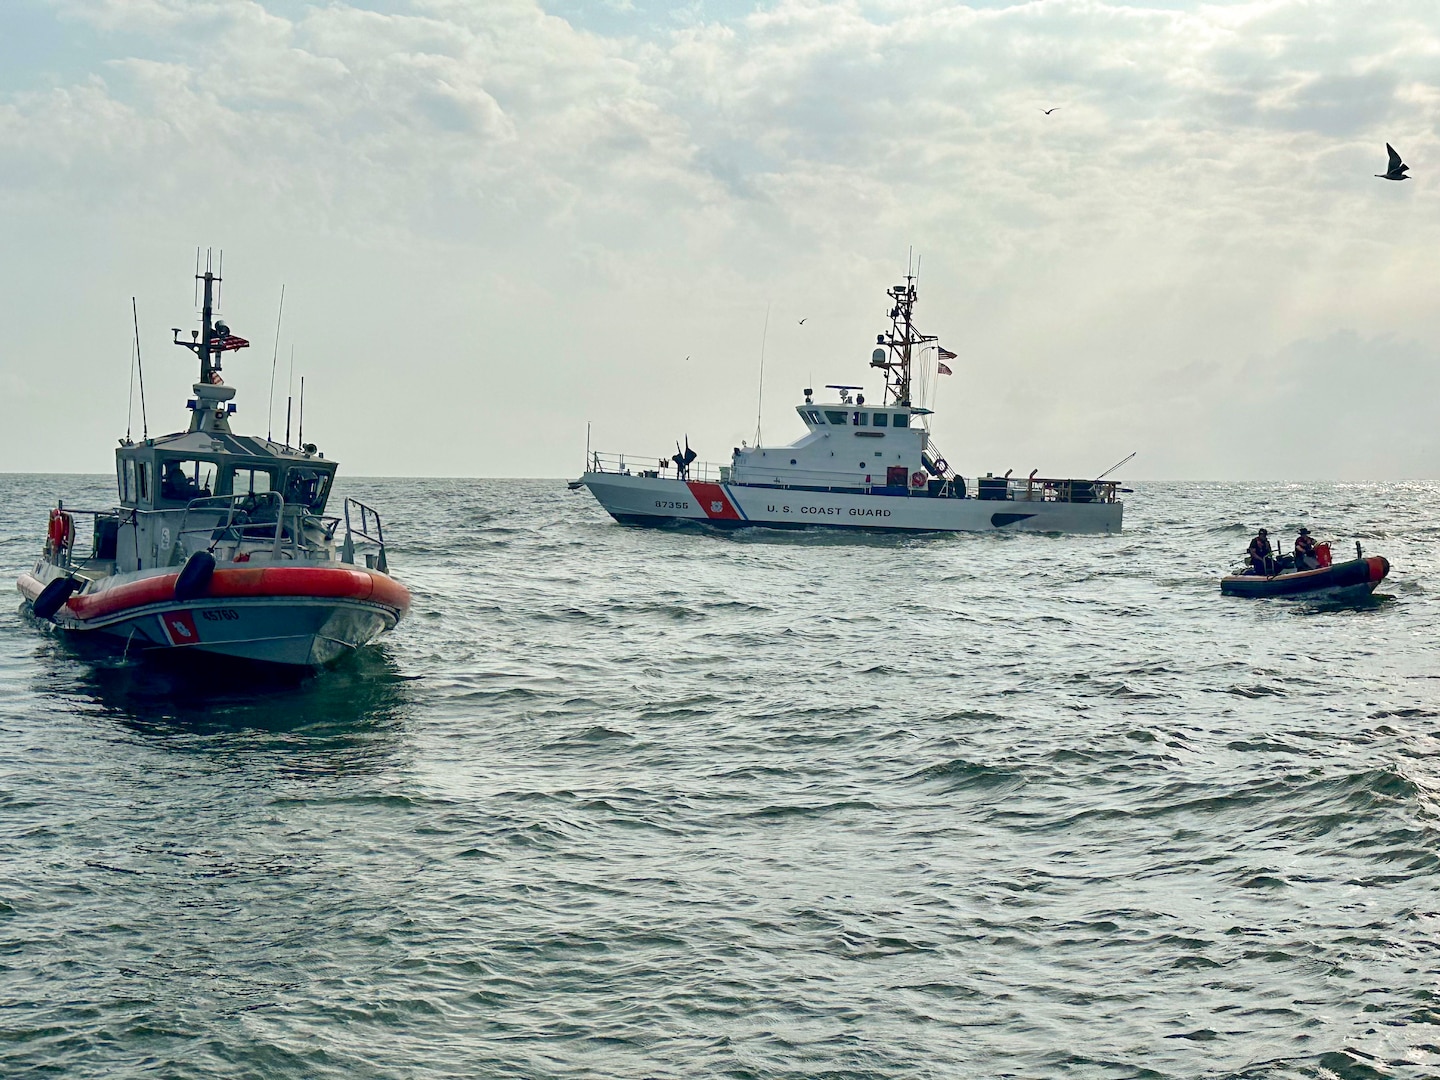 Coast Guard Cutter Hawk law enforcement crew members conduct fisheries boardings on vessels off the coast of Texas, in April 2024. Fishery boardings are conducted to ensure commercial fisheries are following federal laws and regulations on the water. (U.S. Coast Guard Photo Courtesy Coast Guard Cutter Hawk)